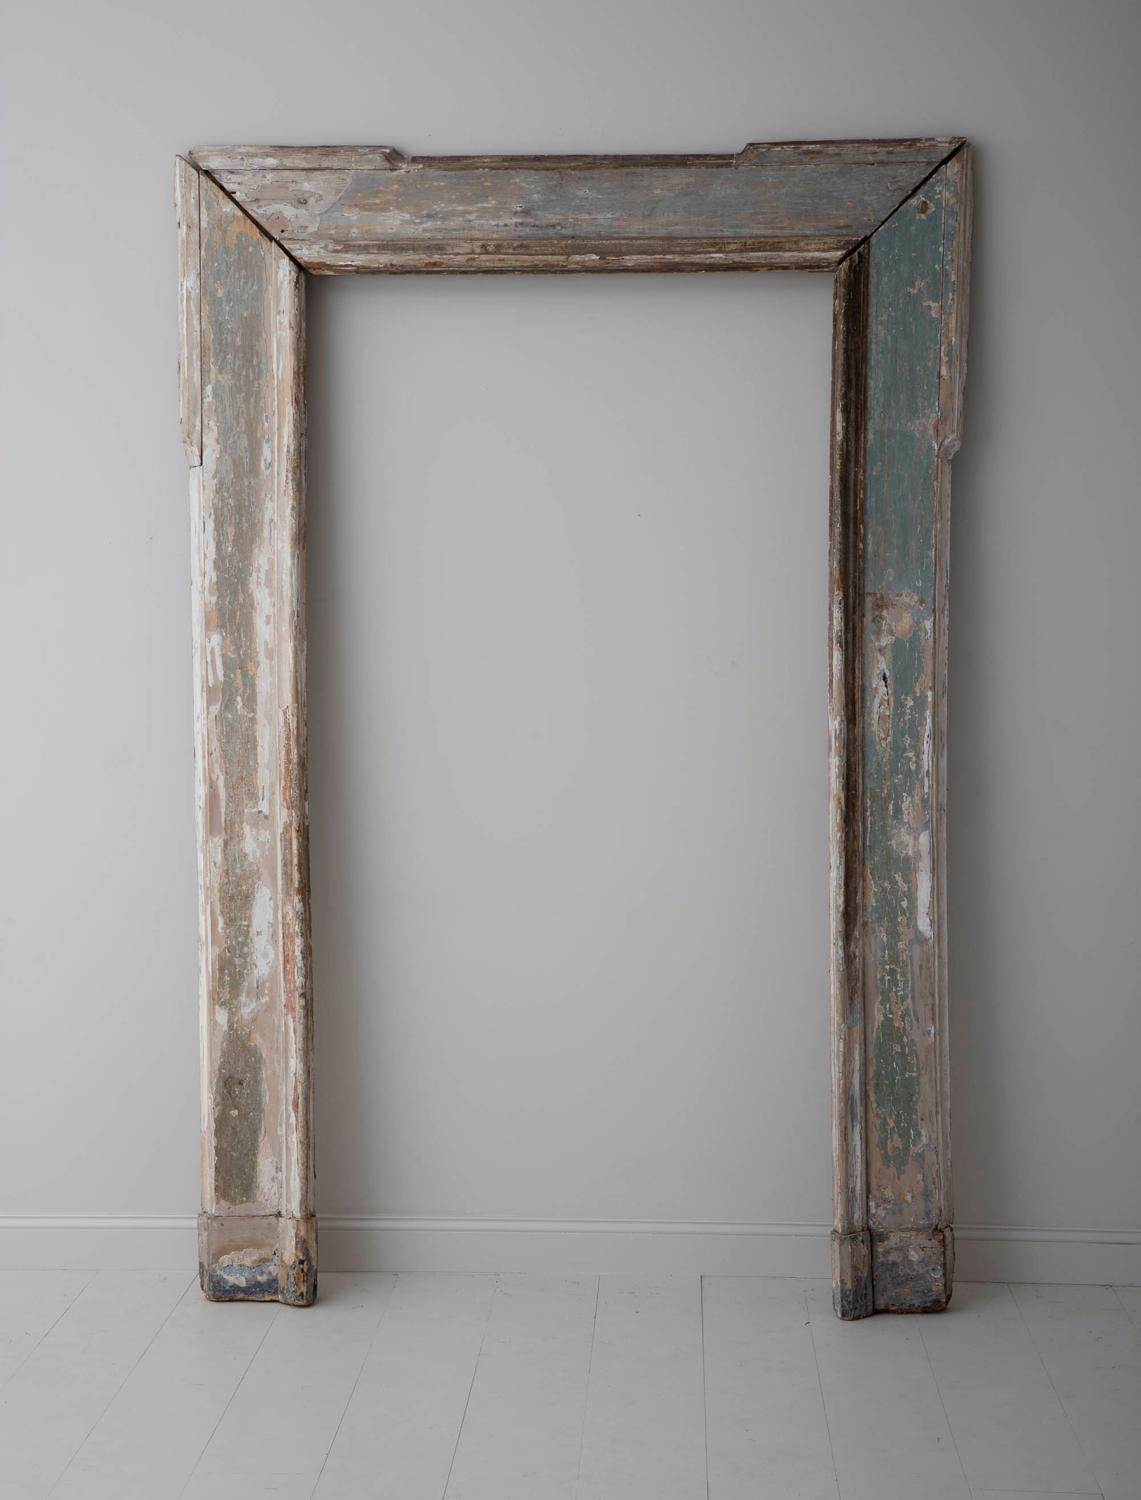 An impressive French architectural wood frame most likely used to frame a mirror. This piece features original paint in a soft, Provençal pale green wearing to reveal natural wood. This would be a lovely piece to frame a mirror or simply to provide